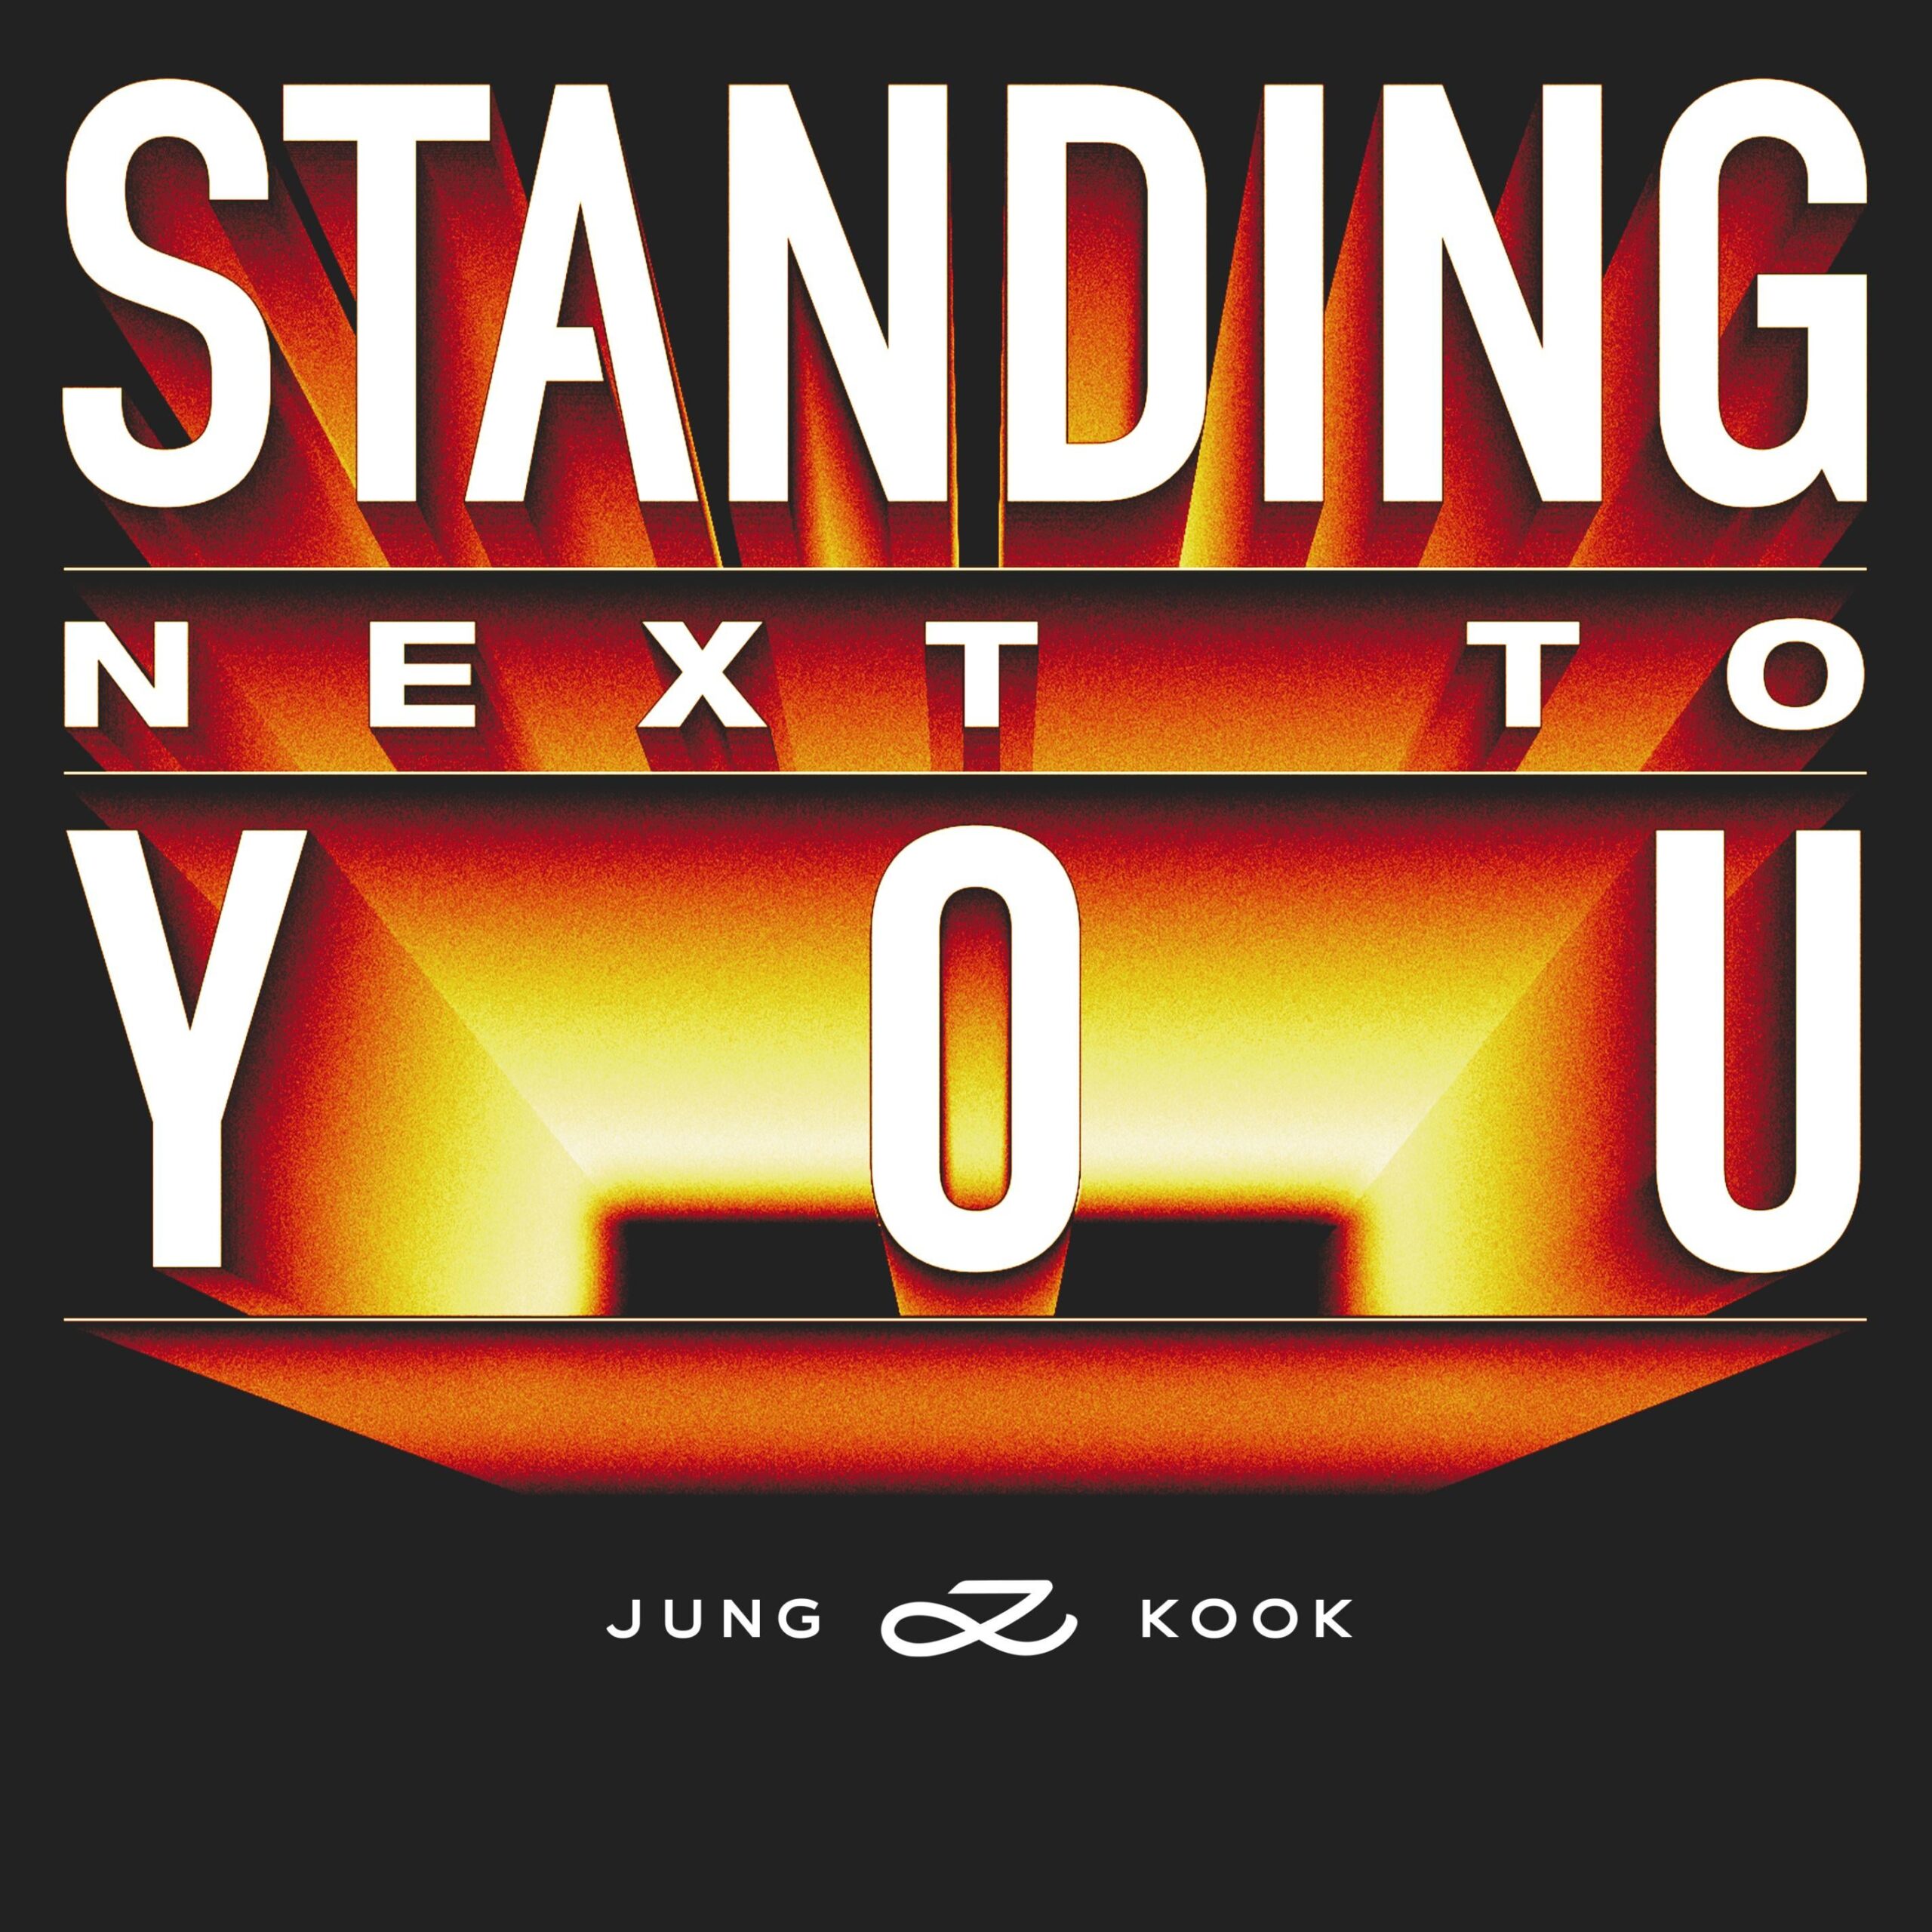 [Notice] Jungkook's 'Standing Next to You - Usher Remix' release announcement (+ENG/JPN/CHN) - 291123